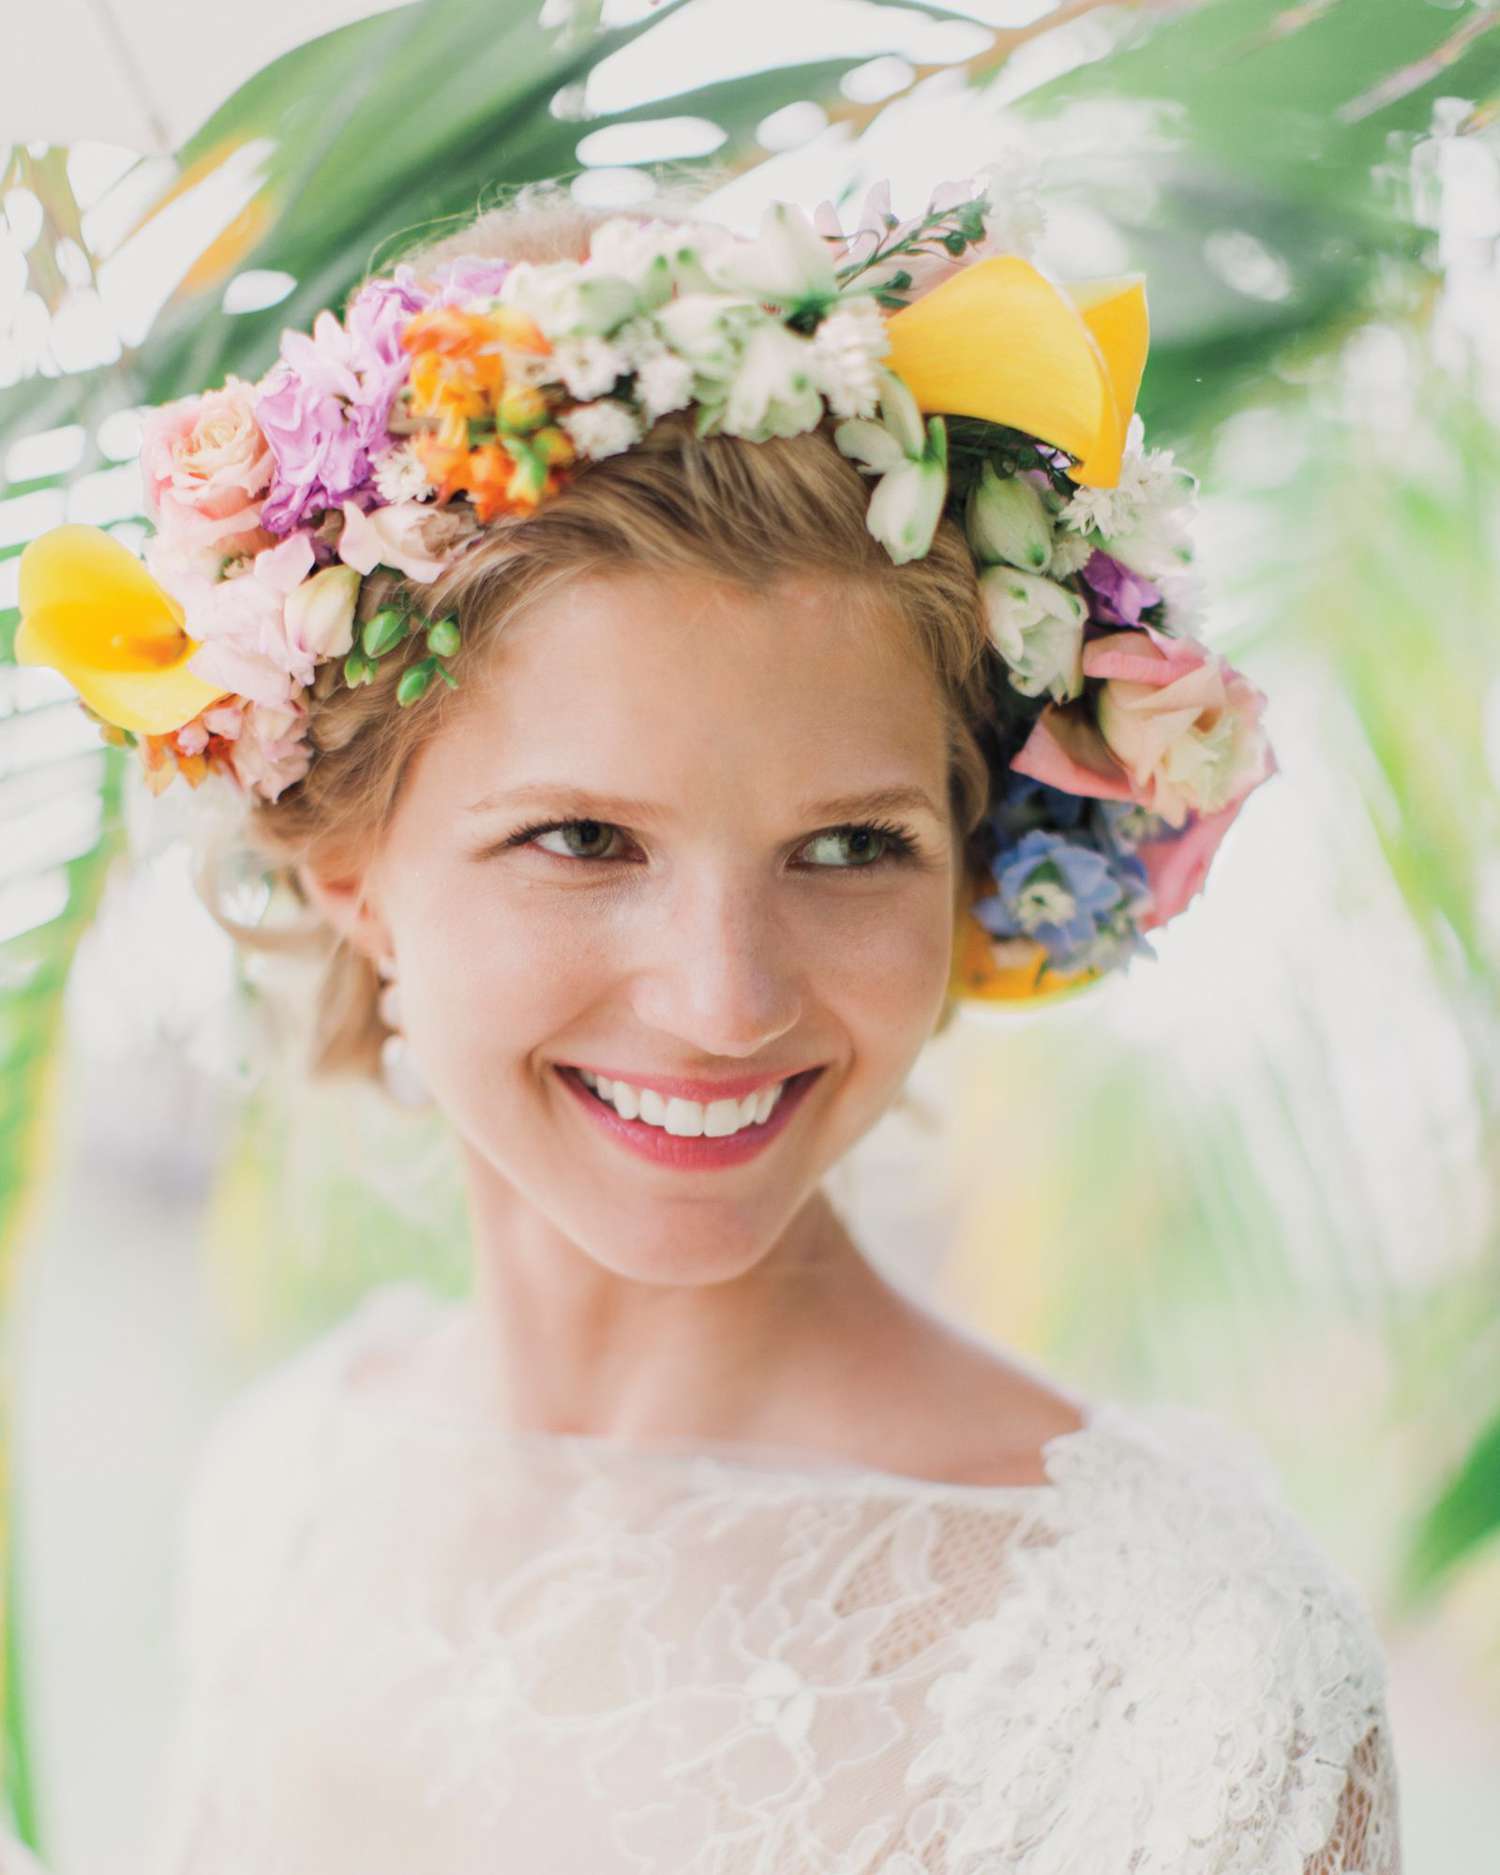 The Dos and Don'ts of Wearing a Flower Crown | Martha Stewart